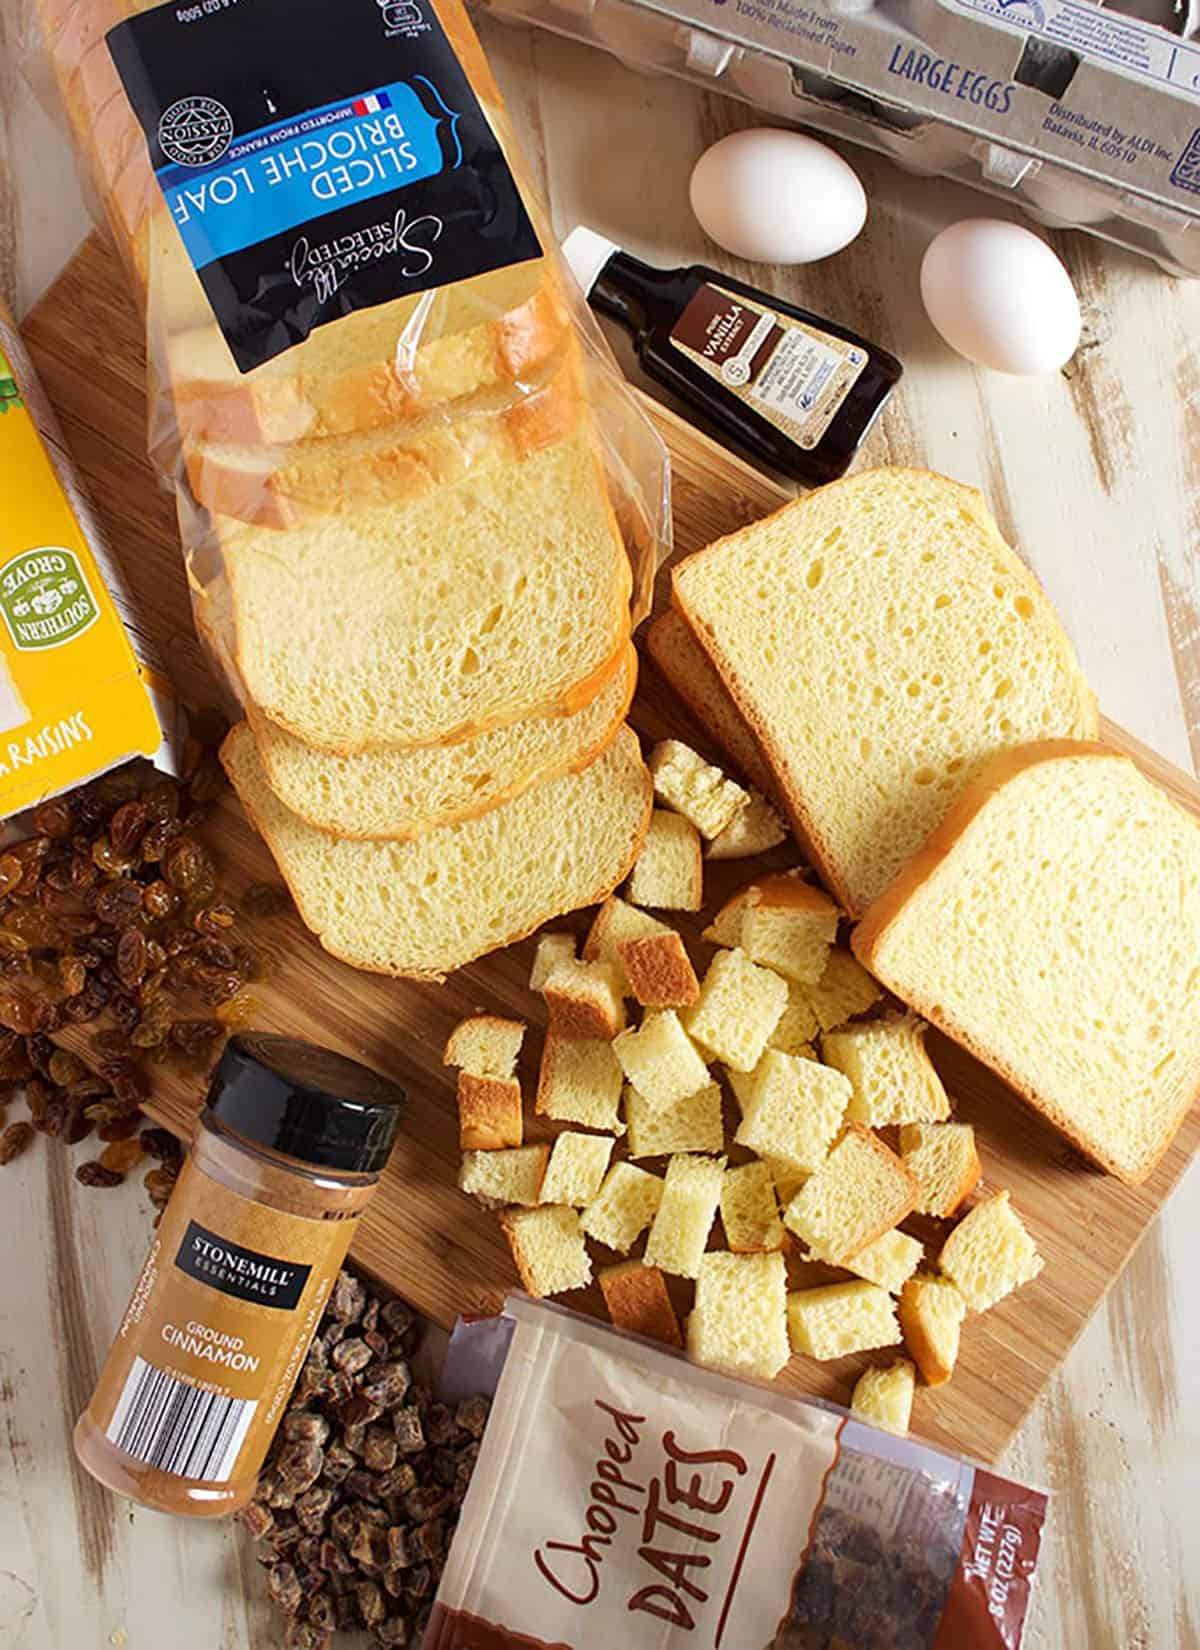 Ingredients for brioche French toast casserole on a board with bread cut into cubes, eggs, cinnamon and nuts.